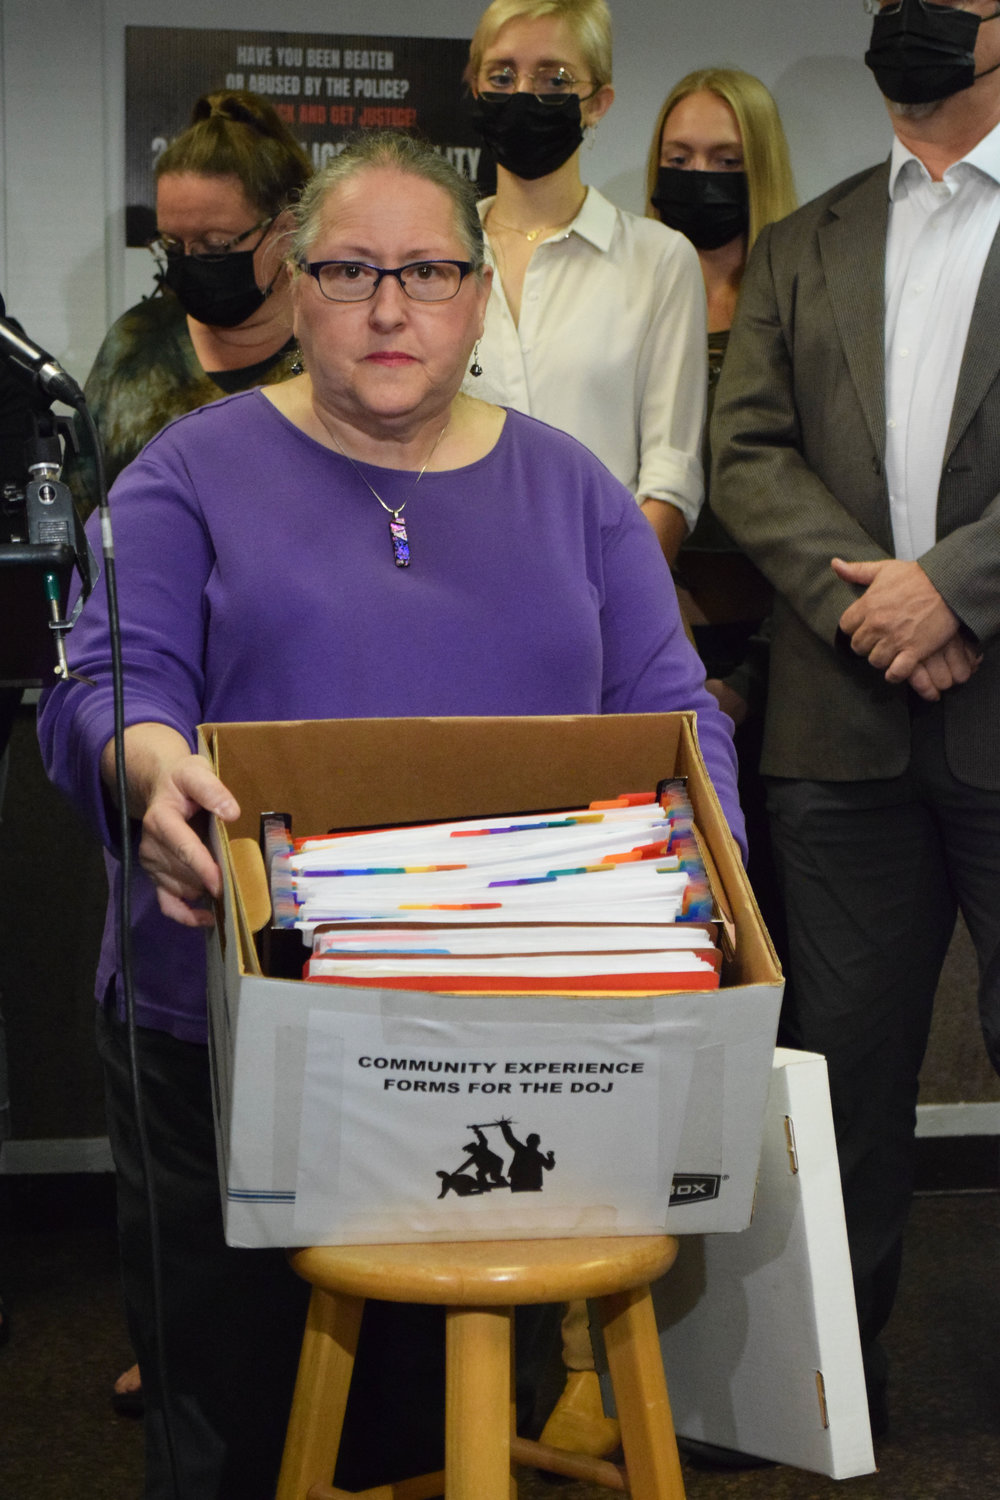 Communities United Against Police Brutality President Michelle Gross shows a box filled with nearly 1,100 stories of people’s experiences to be submitted to the Department of Justice in their ongoing investigation of the Minneapolis Police Department.